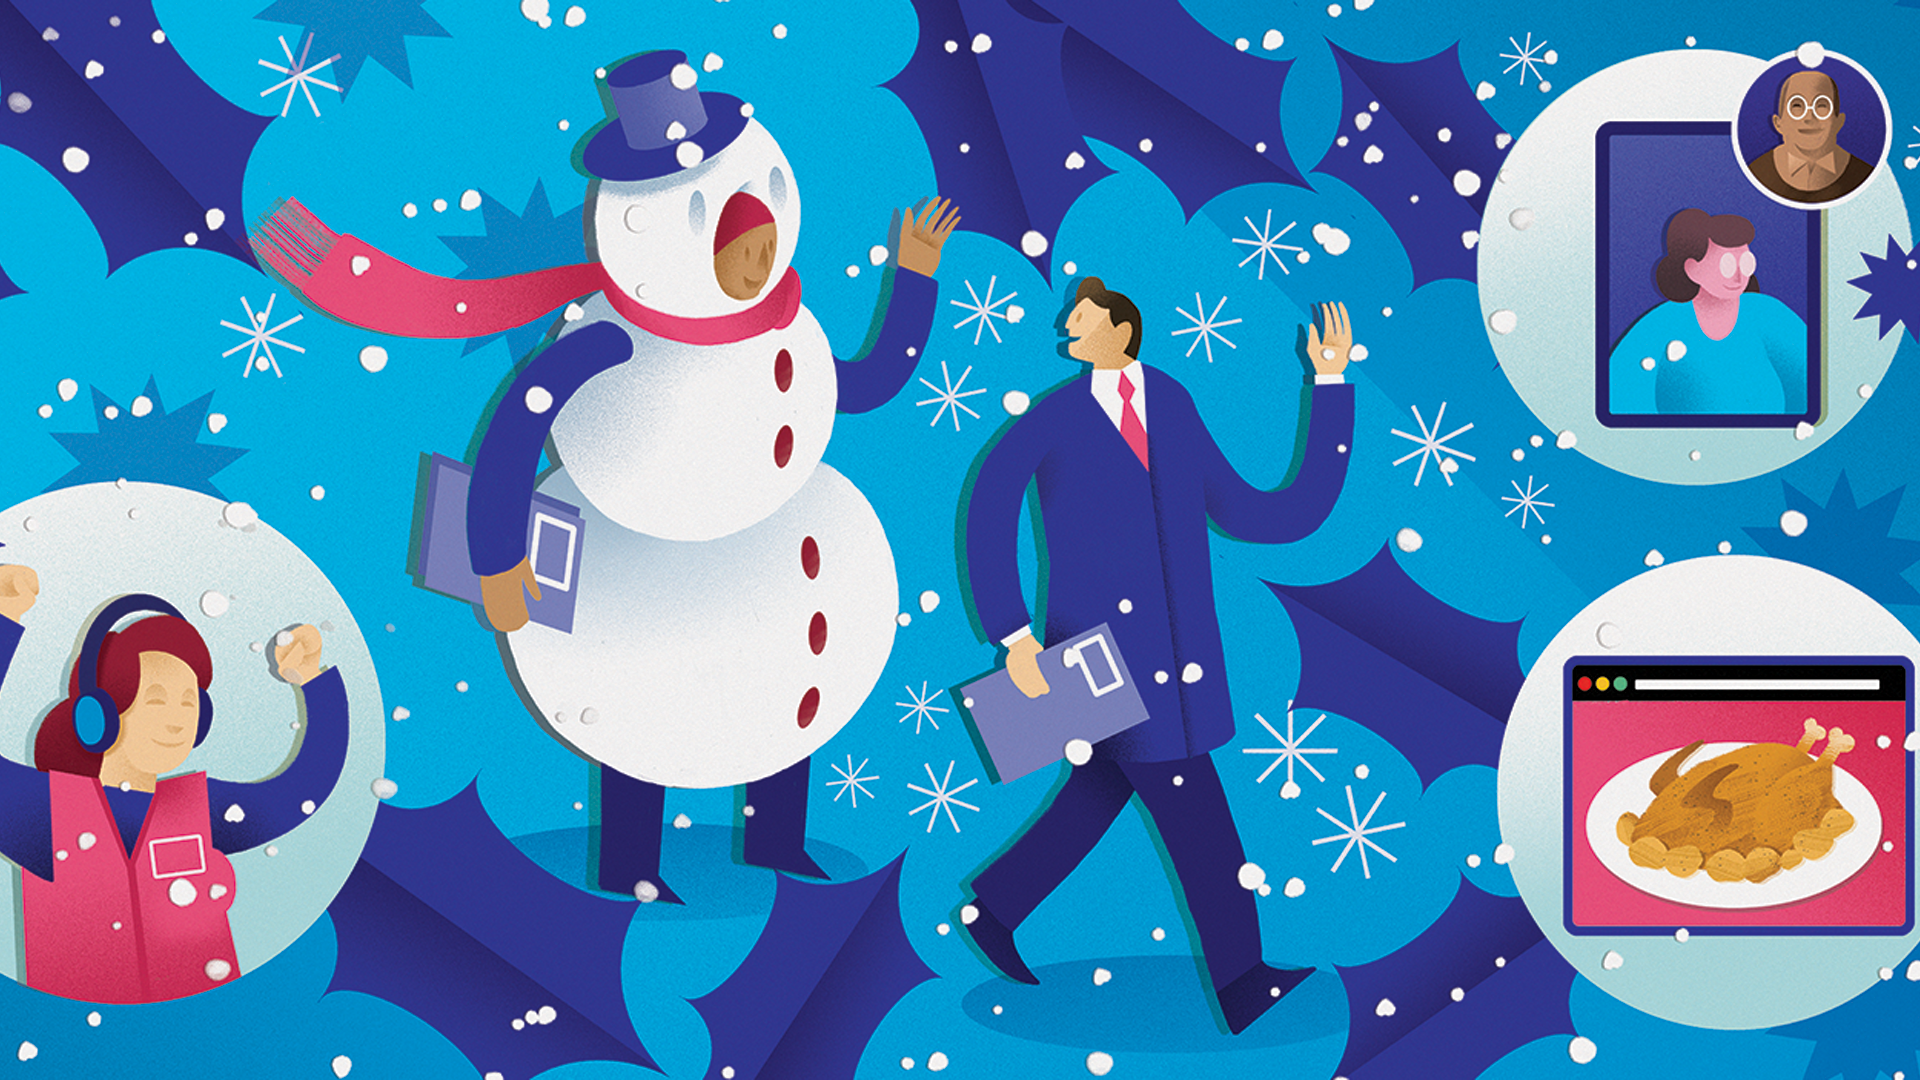 a stylised illustration showing a man and a snowman and various examples of digital connections